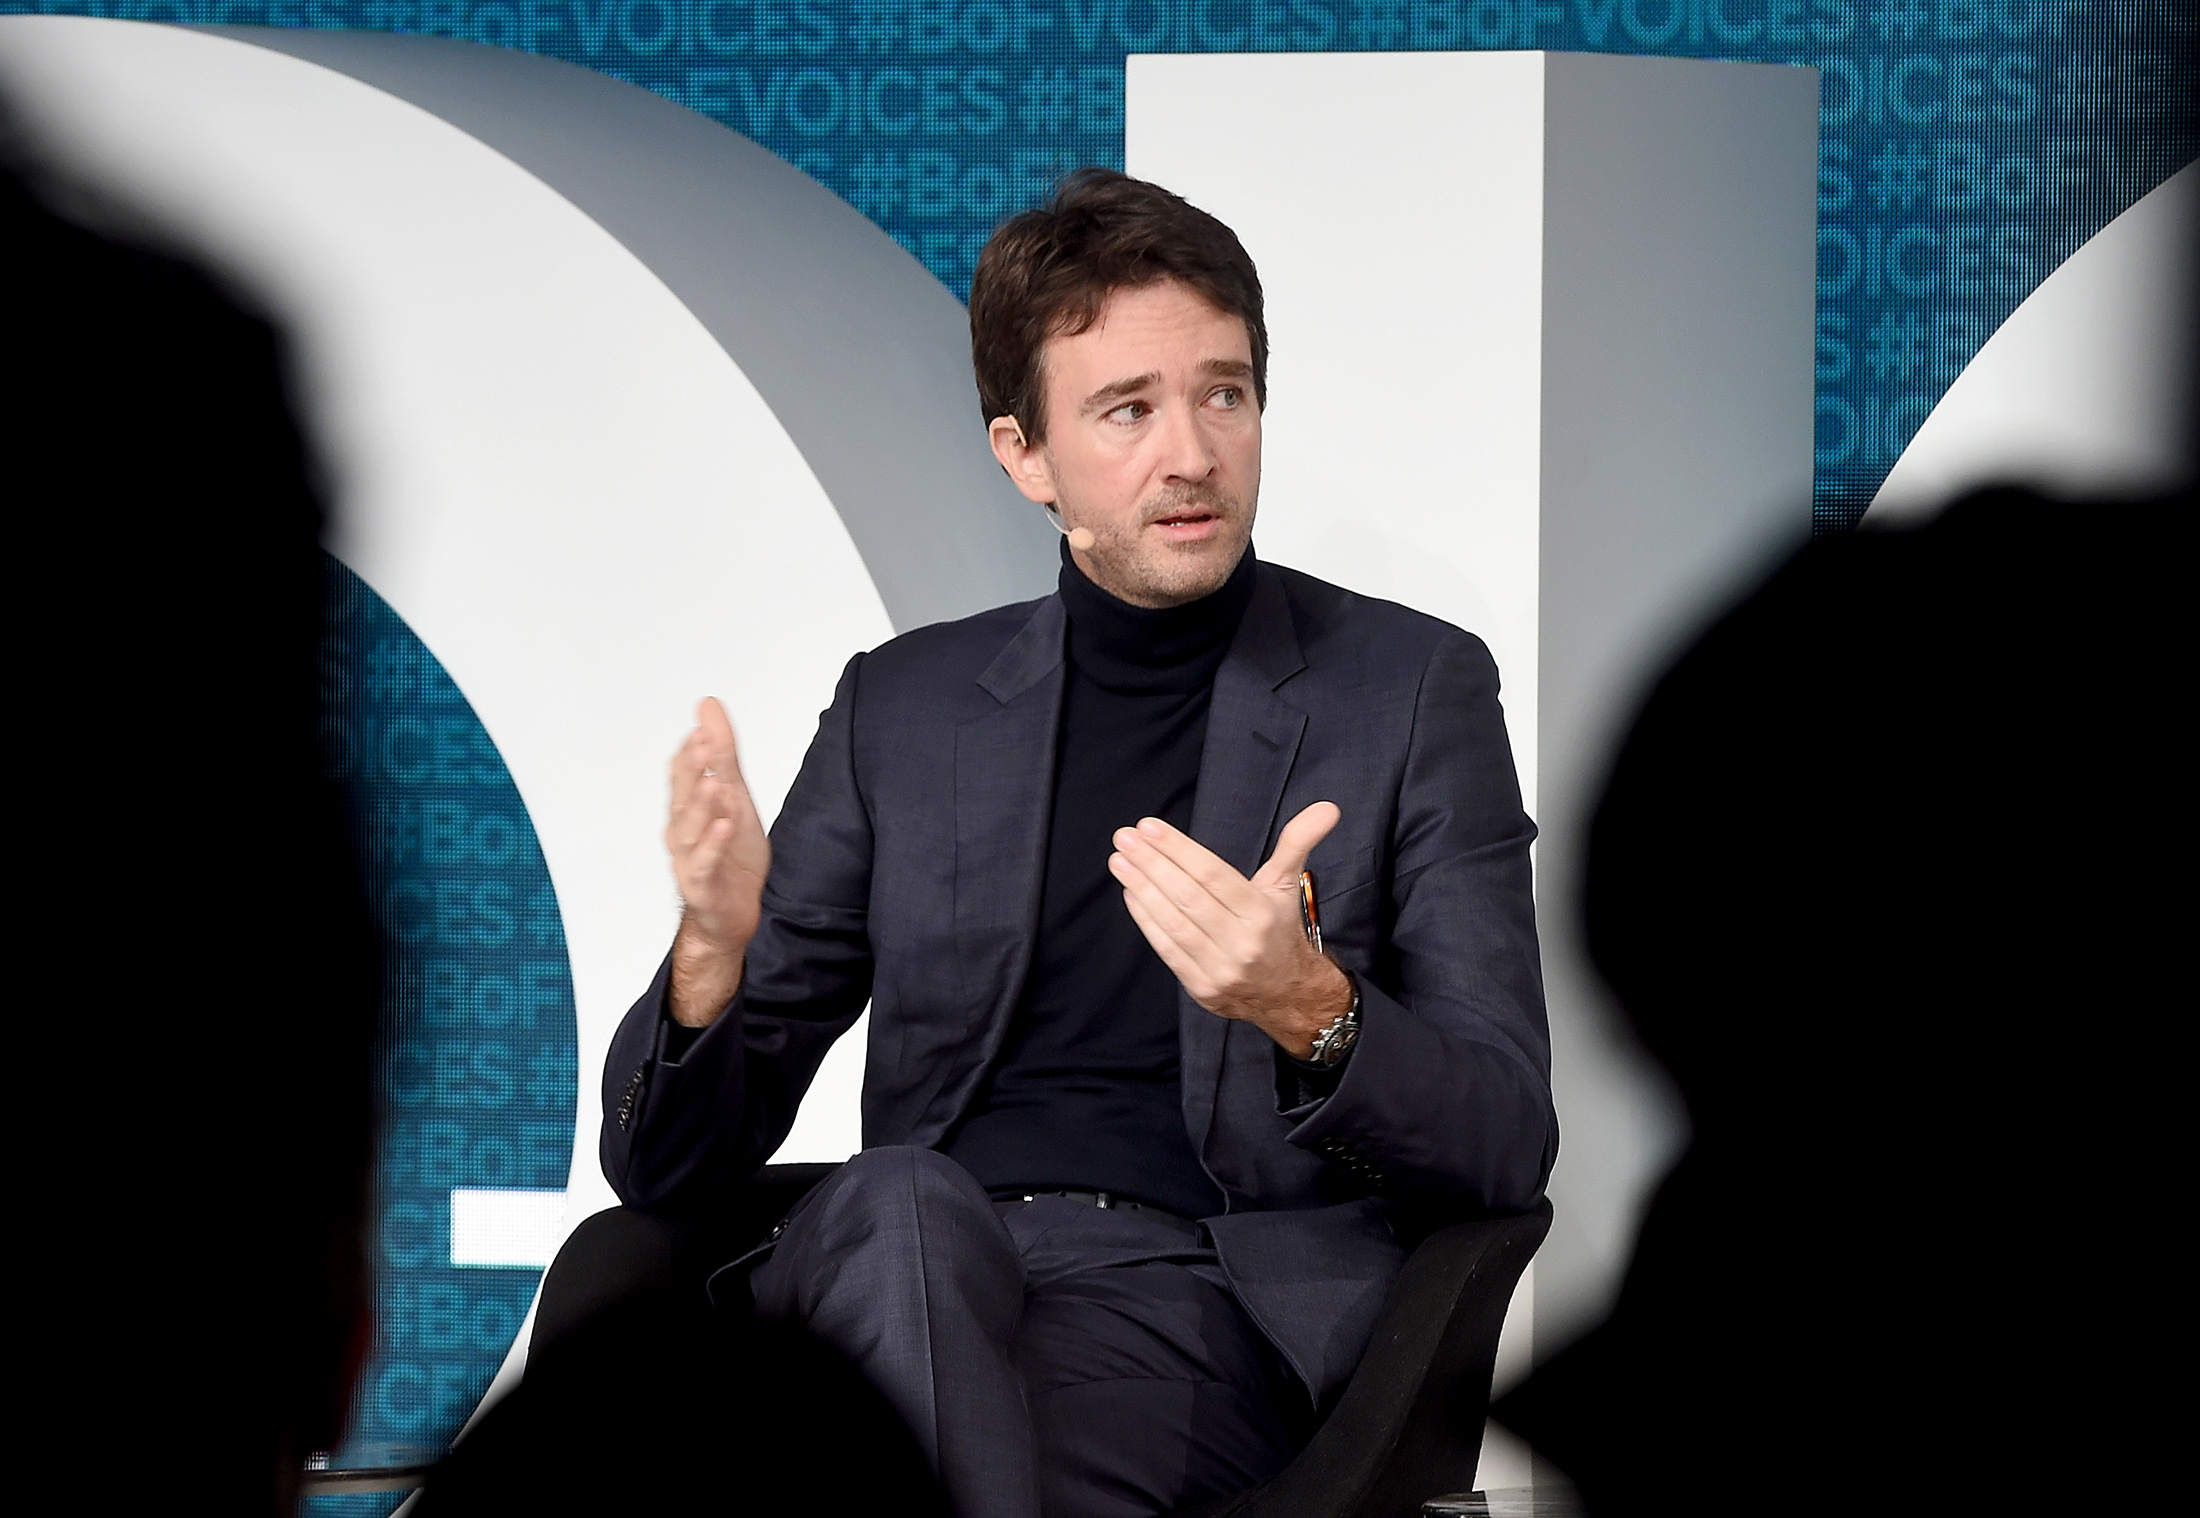 LVMH's Antoine Arnault Takes Up Group Image as Heirs Flex Muscle - Bloomberg